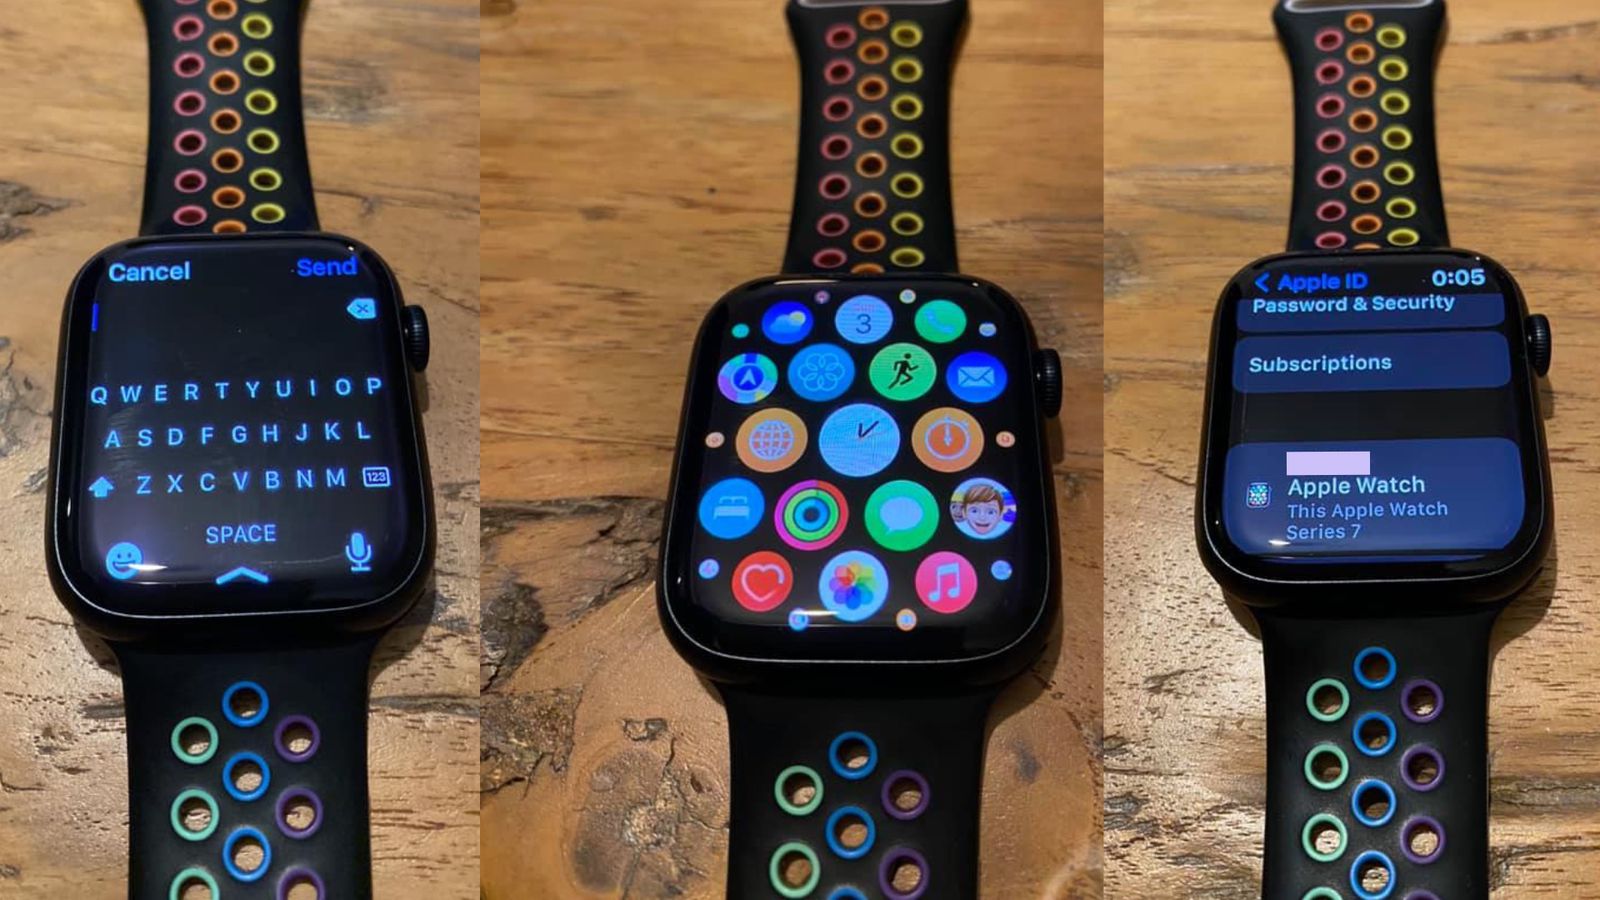 Apple Watch Series 7 should be ready to go on sale now